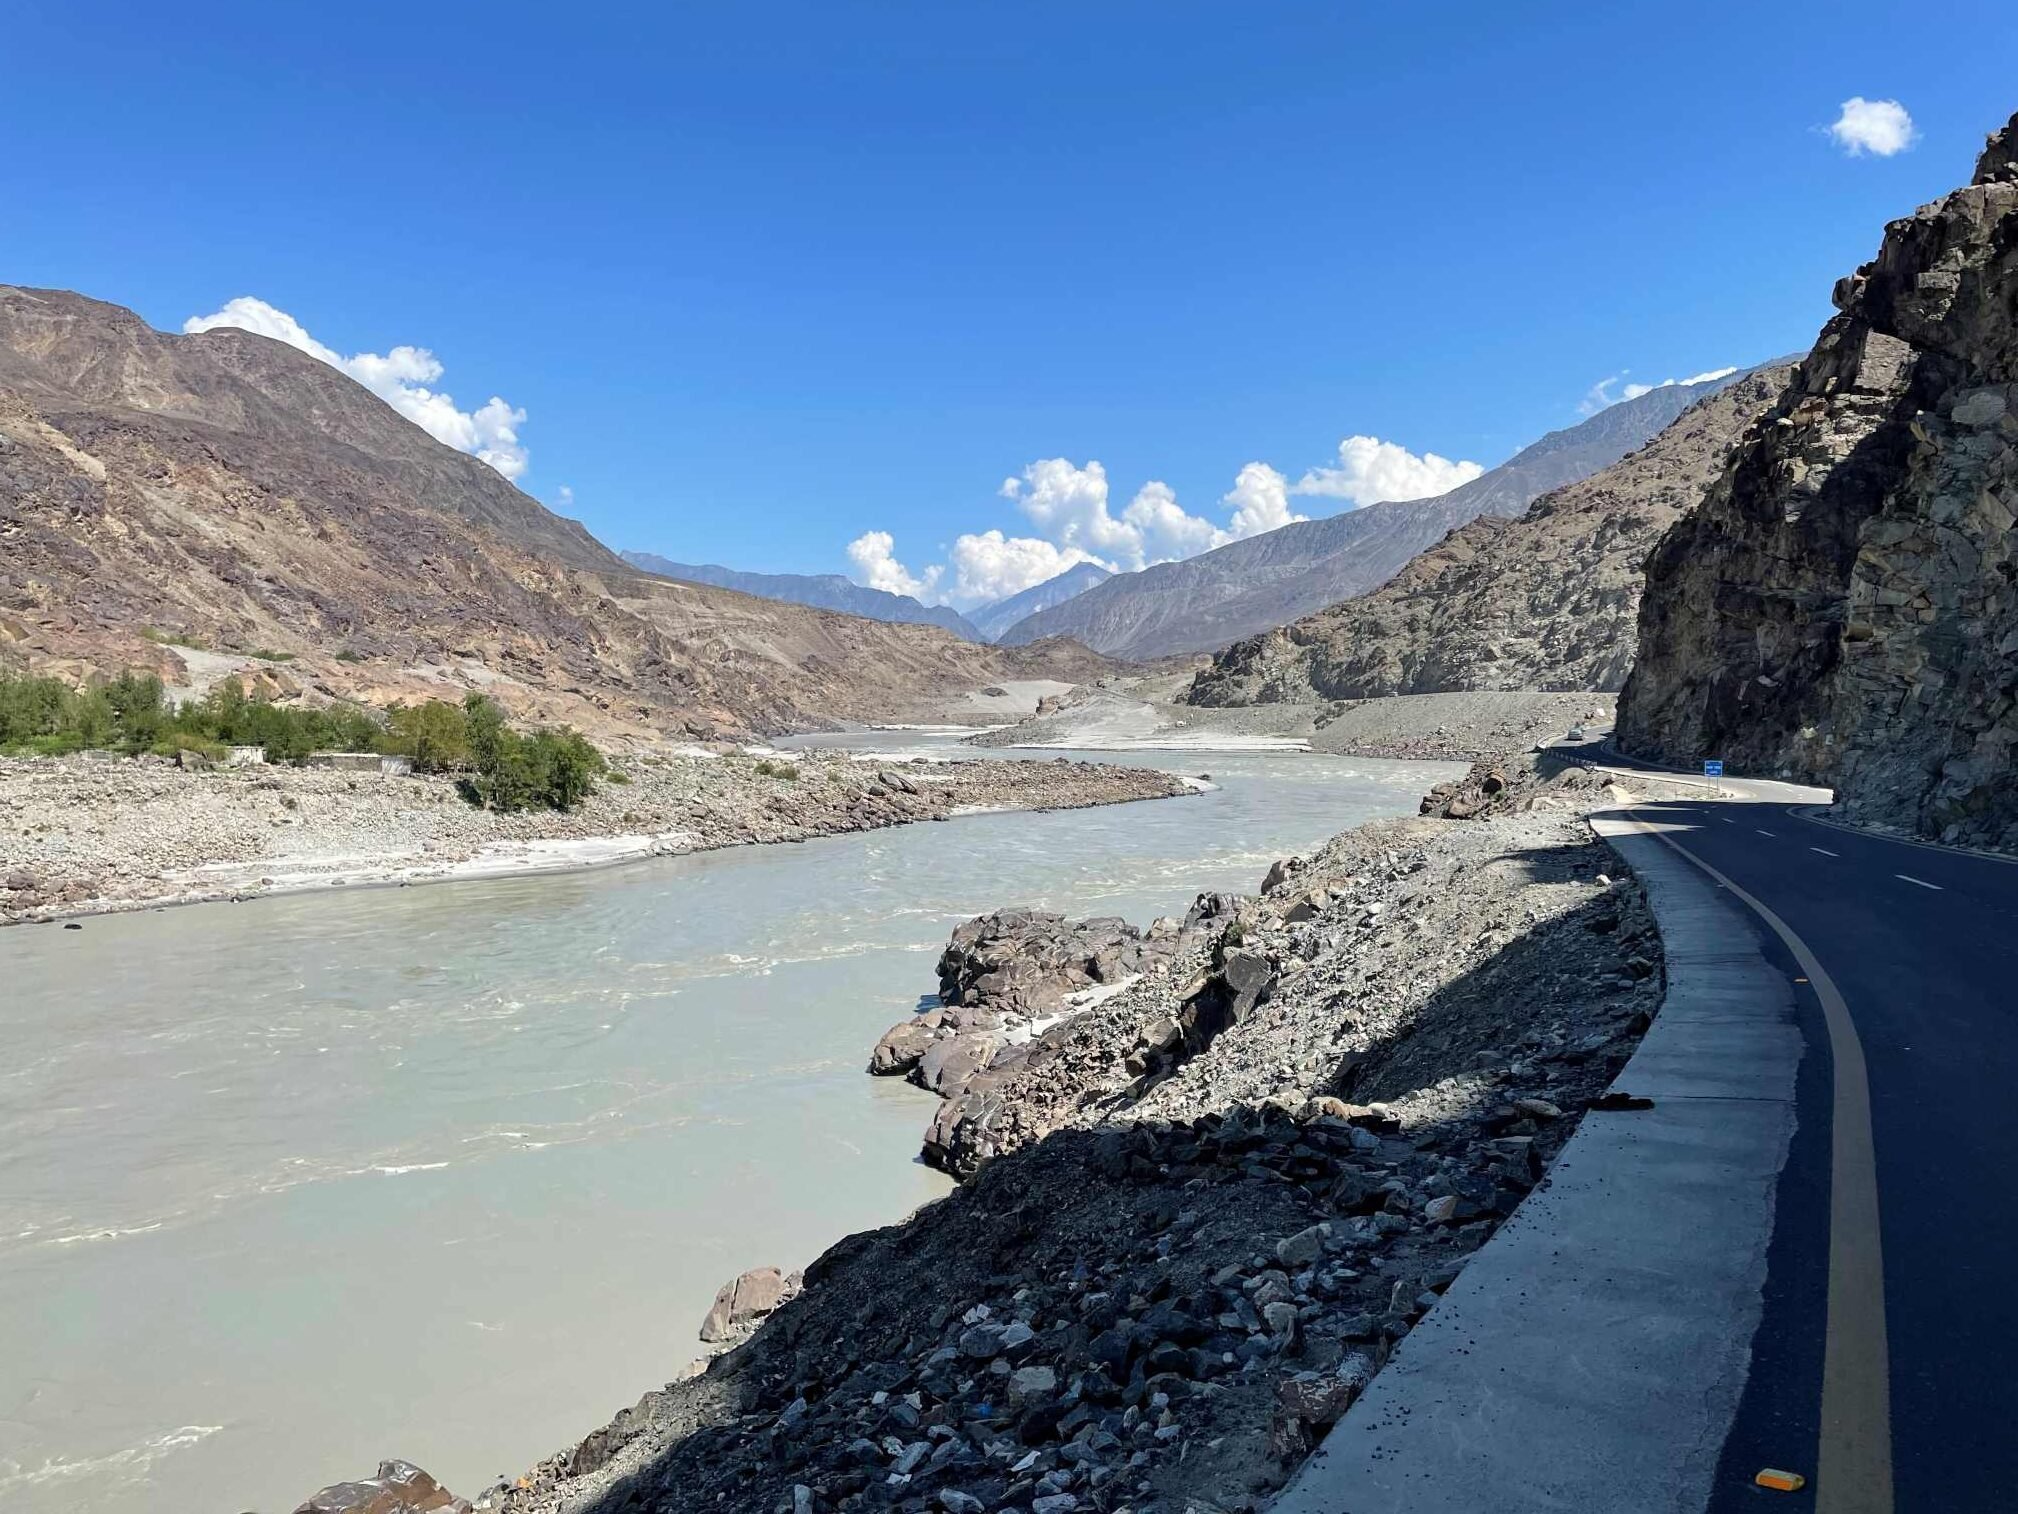 a grey river flowing through a dry rocky section of pakistan's karakoram highway